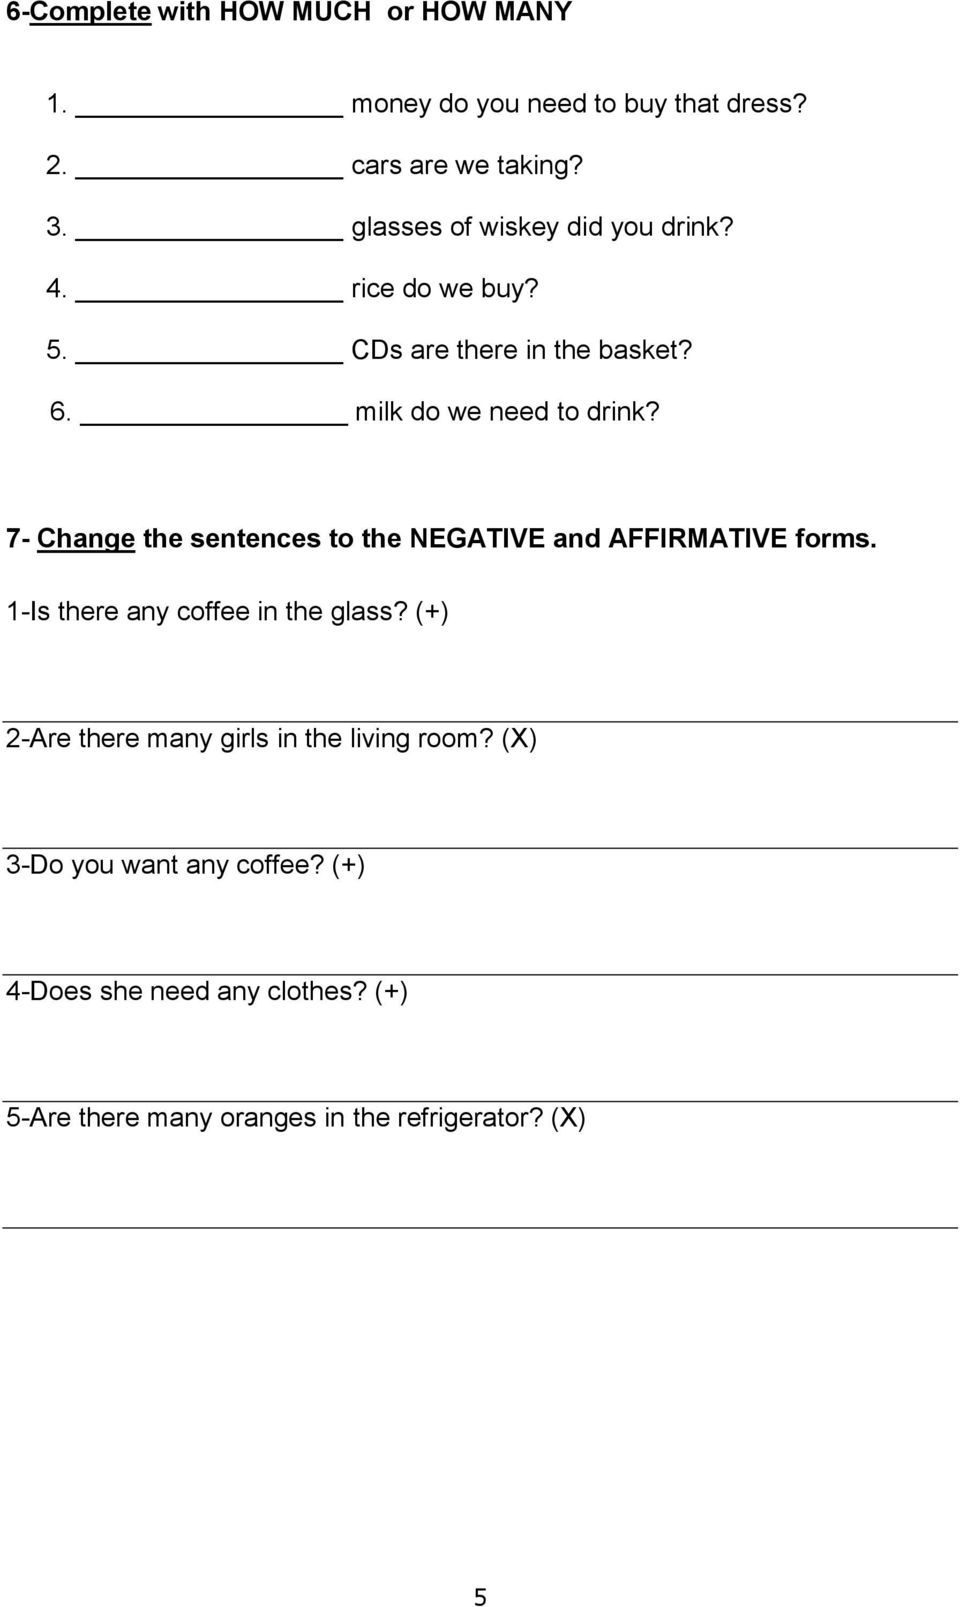 7- Change the sentences to the NEGATIVE and AFFIRMATIVE forms. 1-Is there any coffee in the glass?